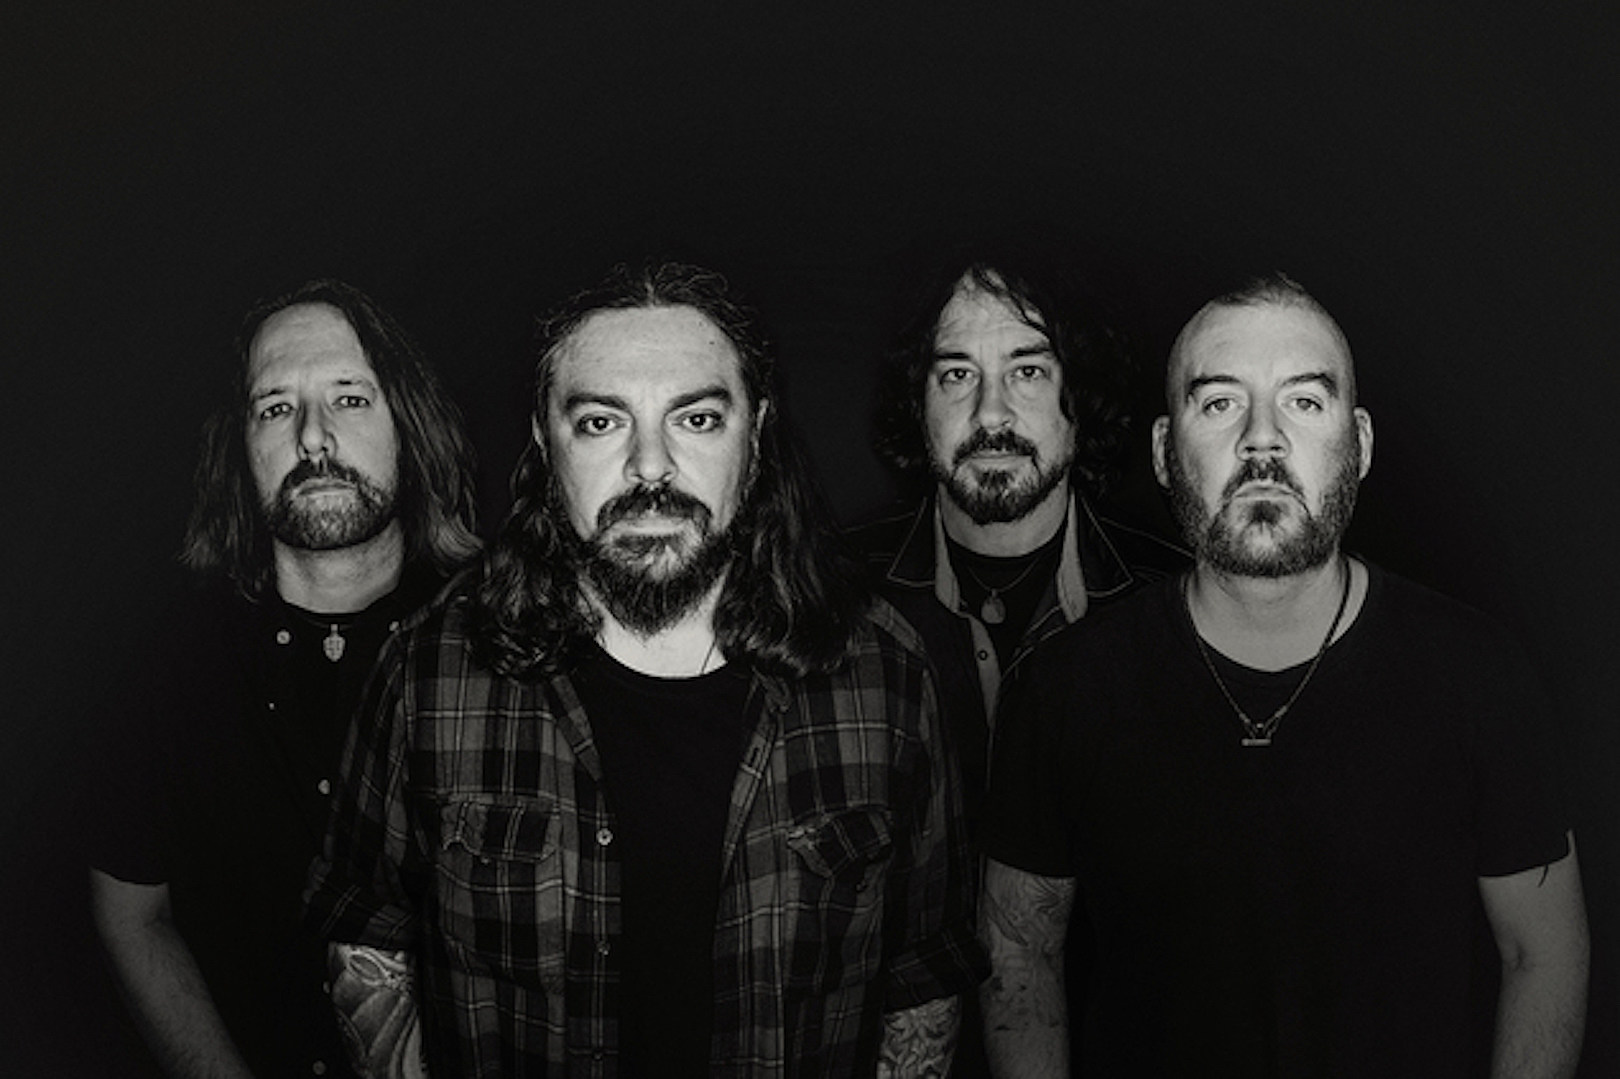 Seether Mark th Anniversary With Vicennial Hits Collection